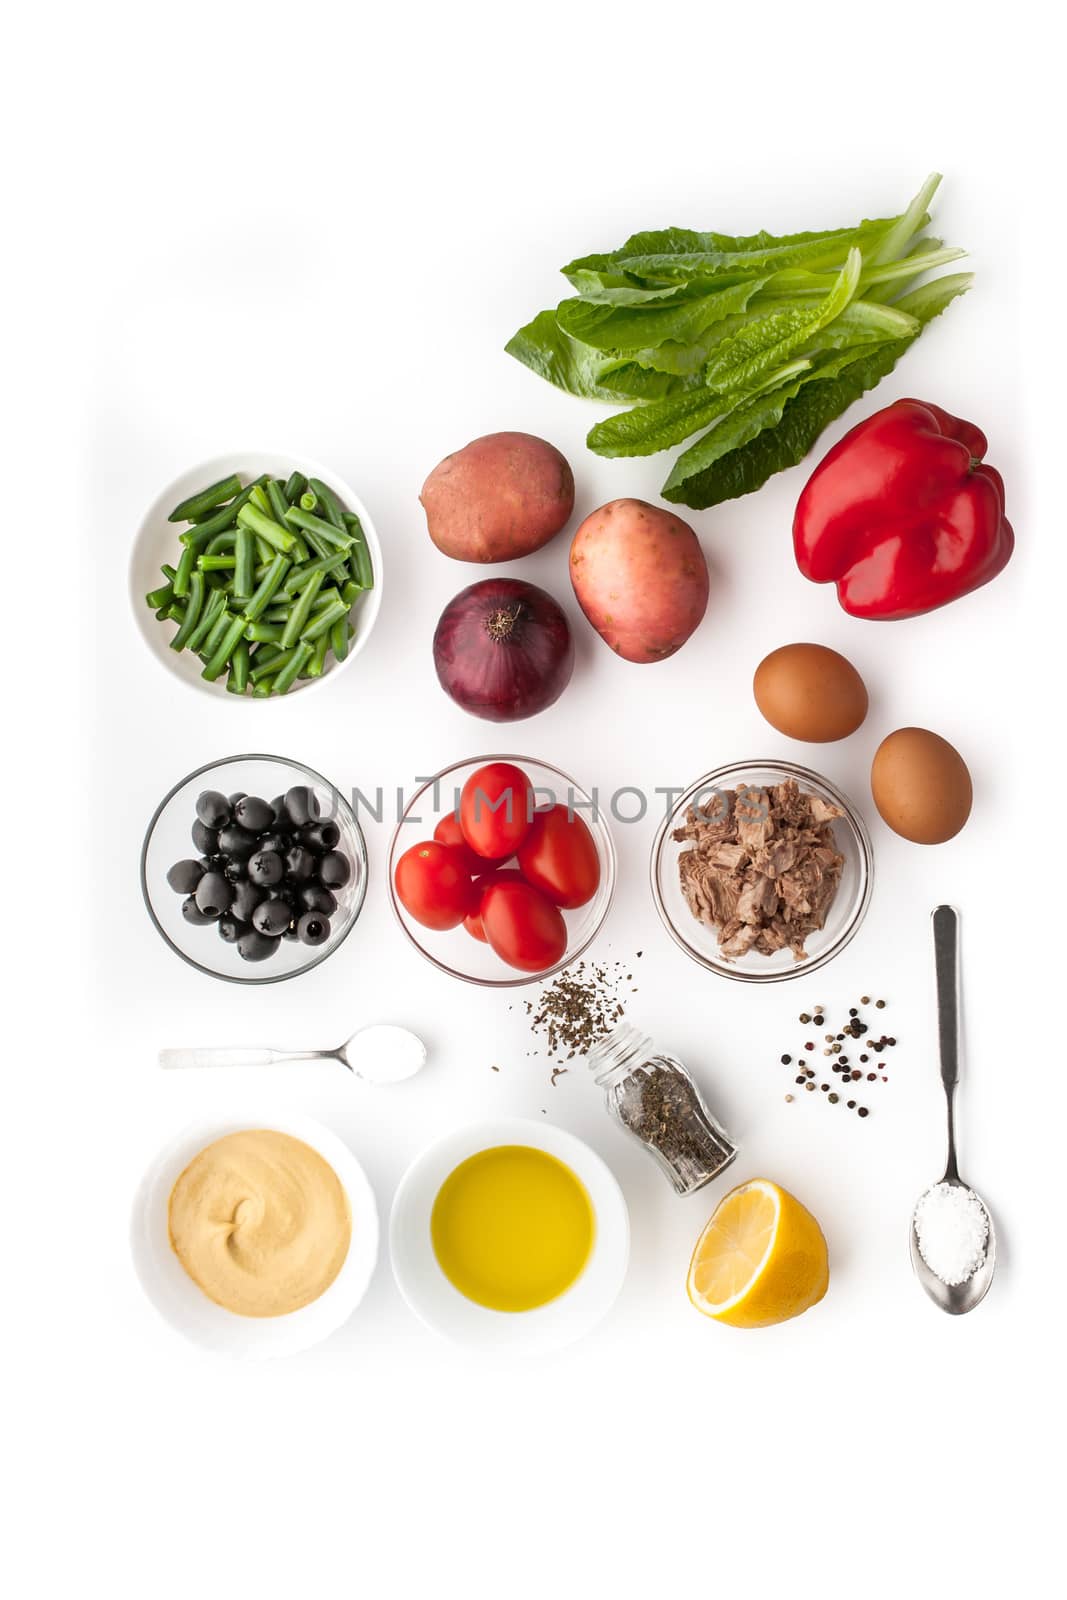 Ingredients for Nicoise salad on the white background